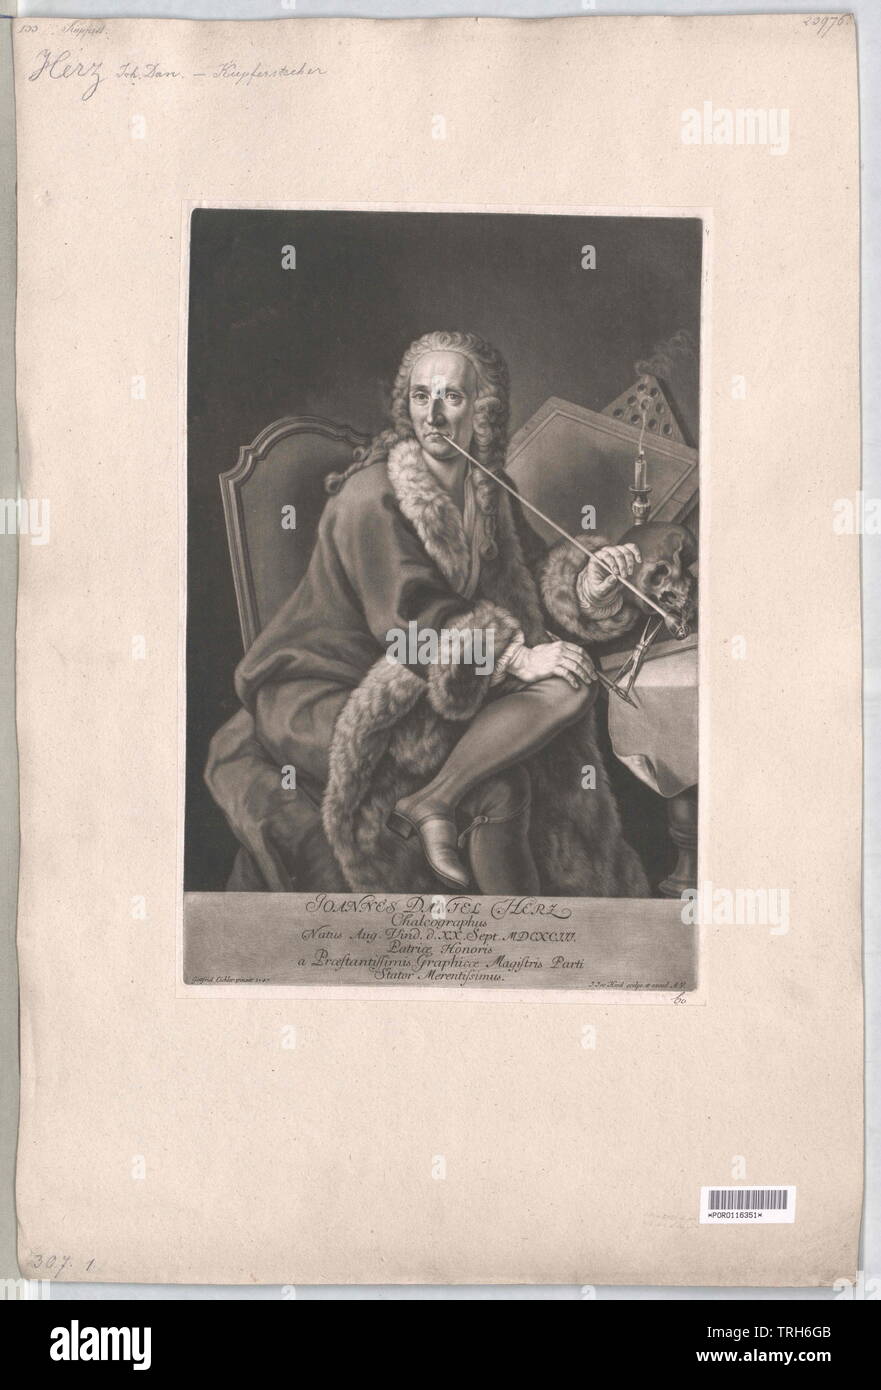 Herz, Johann Daniel,copperplate engraver, copperplate engravers, artist, artists, people, full-length, full length, man, men, male, manly, heart, hearts, Additional-Rights-Clearance-Info-Not-Available Stock Photo